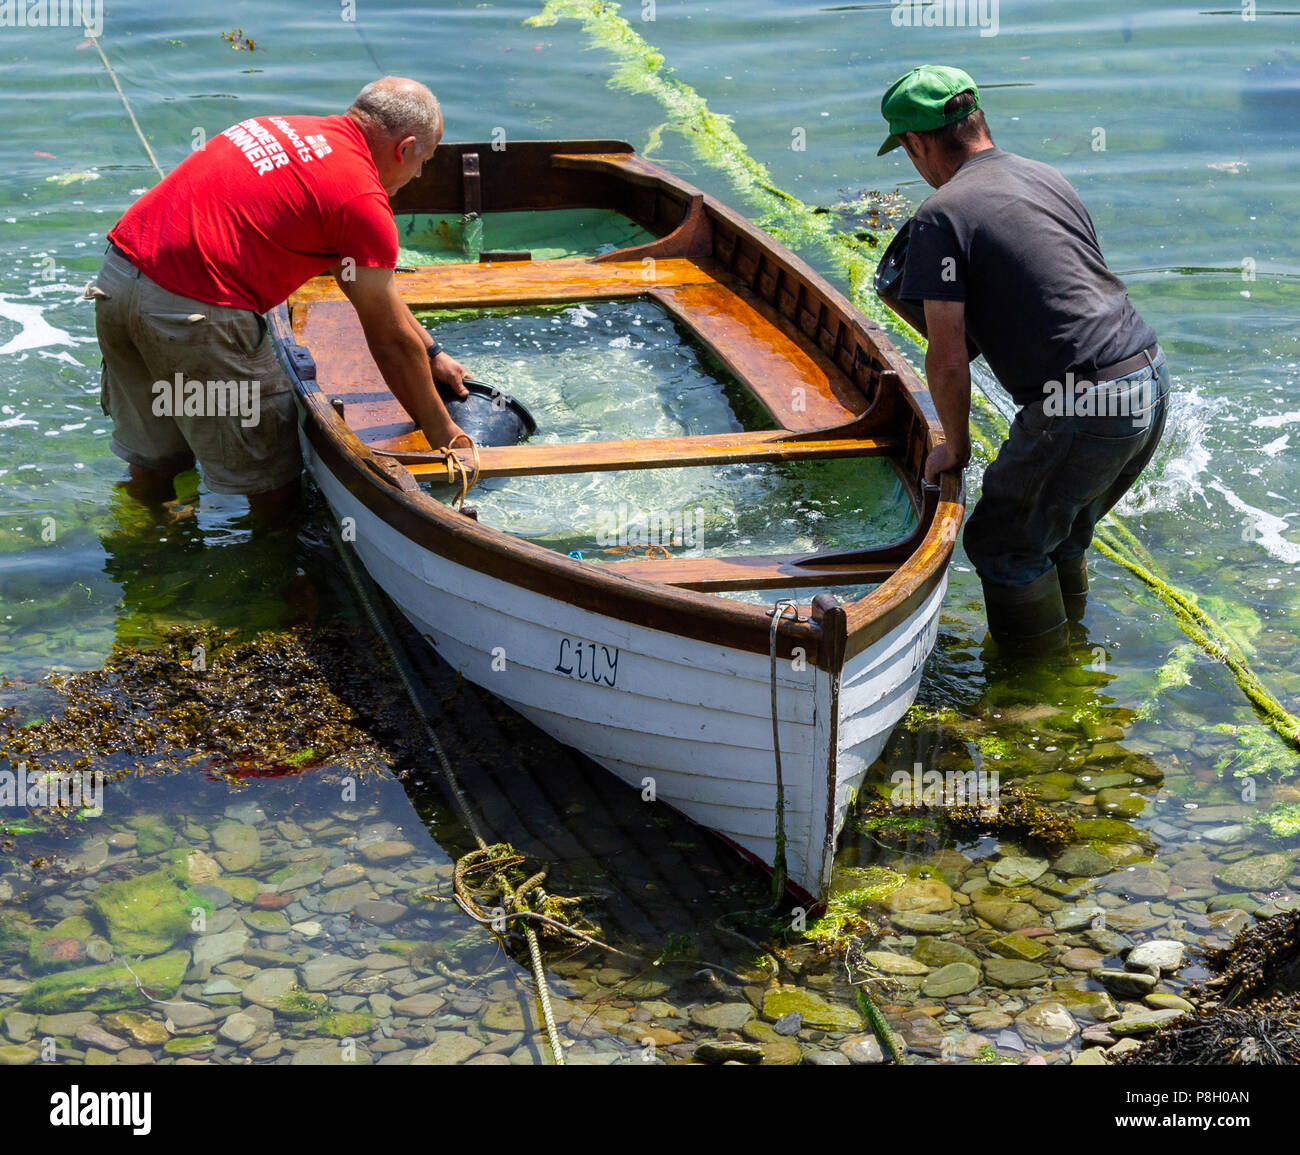 West Cork, Ireland. 11th July, 2018. The constant scorching sun has caused the clinker built wooden planks of the boat to shrink allowing seawater in. Leaving the hull flooded for a few days allows the wood to swell and become water tight, but it still needs bailing out!!  Credit: aphperspective/Alamy Live News Stock Photo